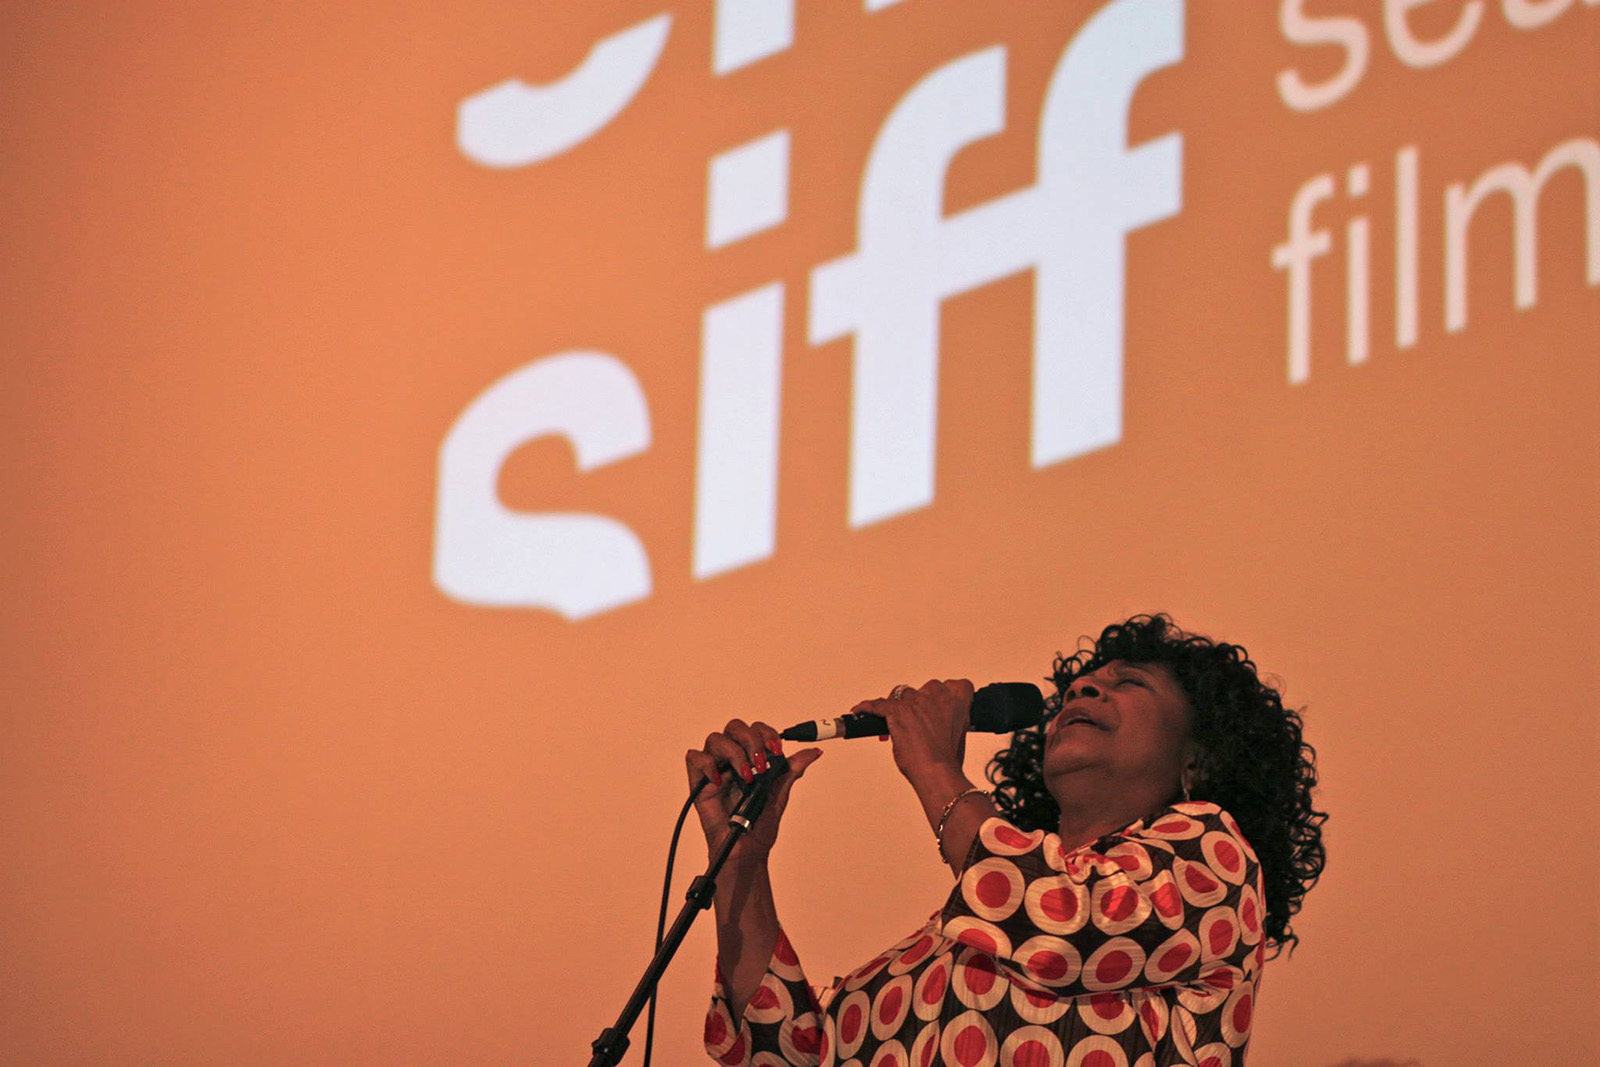 Gospel singer, Merry Clayton, graces the stage of the Egyptian at the Centerpiece Film and Gala before a screening of her film, Twenty Feet from Stardom